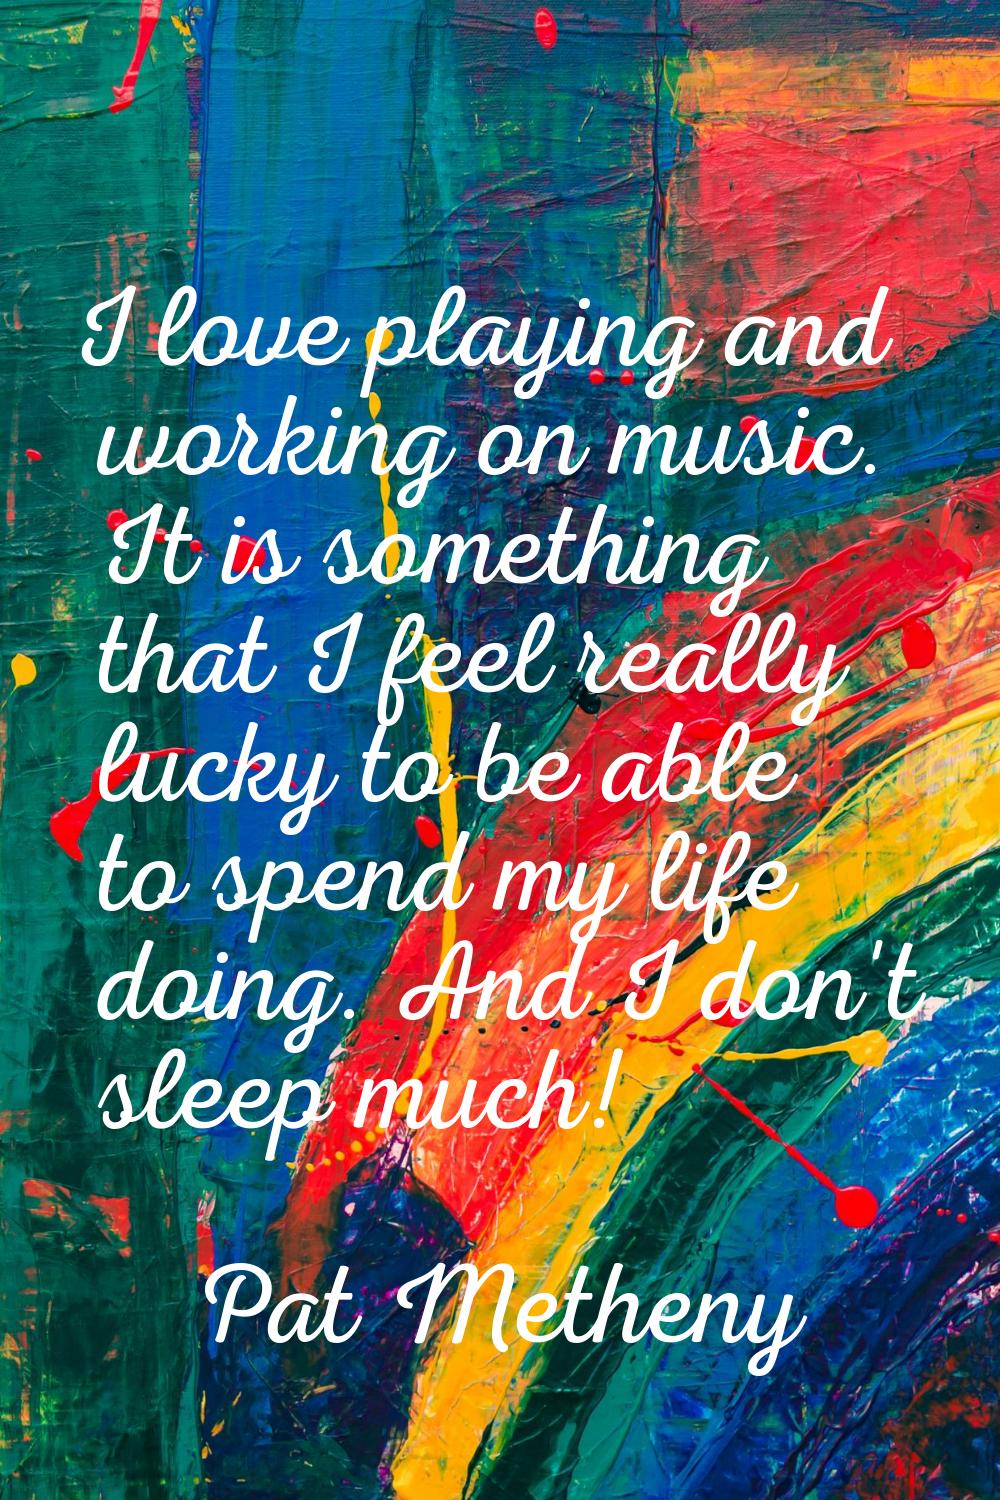 I love playing and working on music. It is something that I feel really lucky to be able to spend m